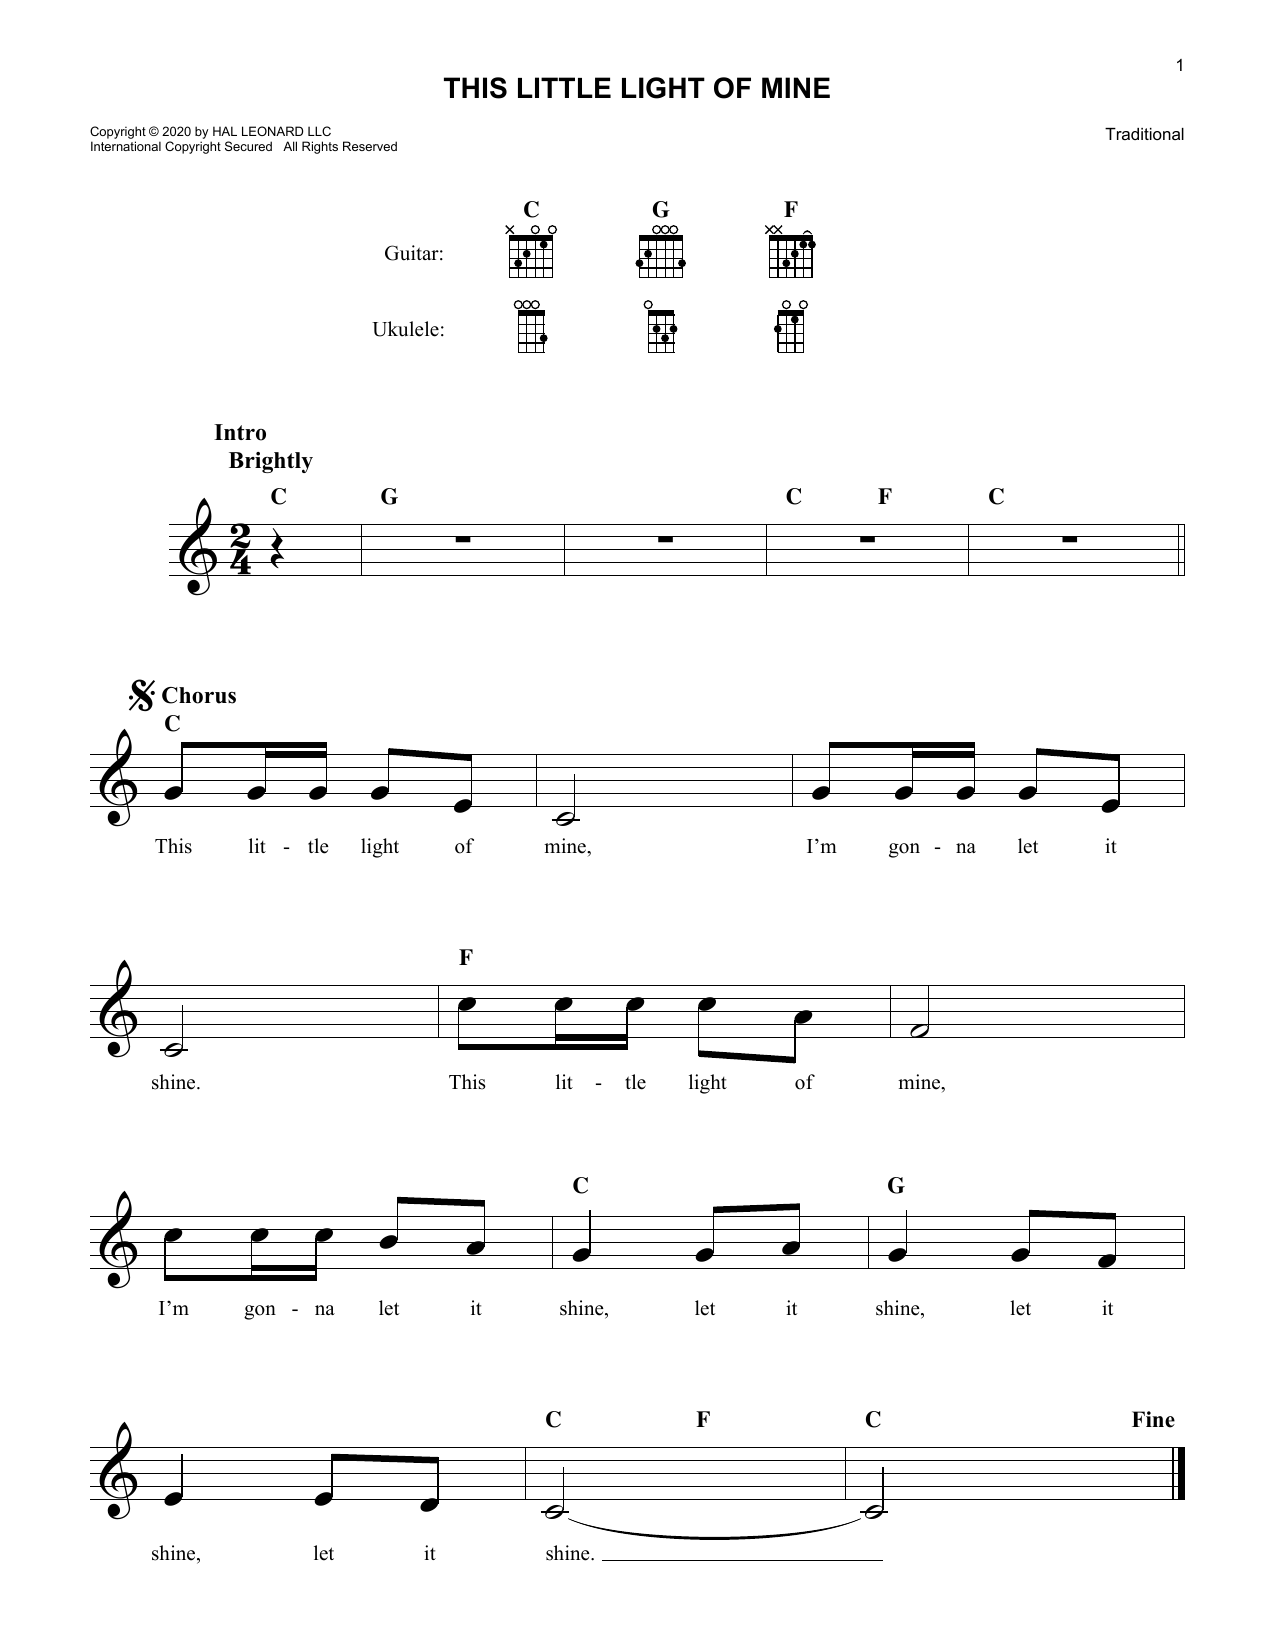 Download Traditional This Little Light Of Mine Sheet Music